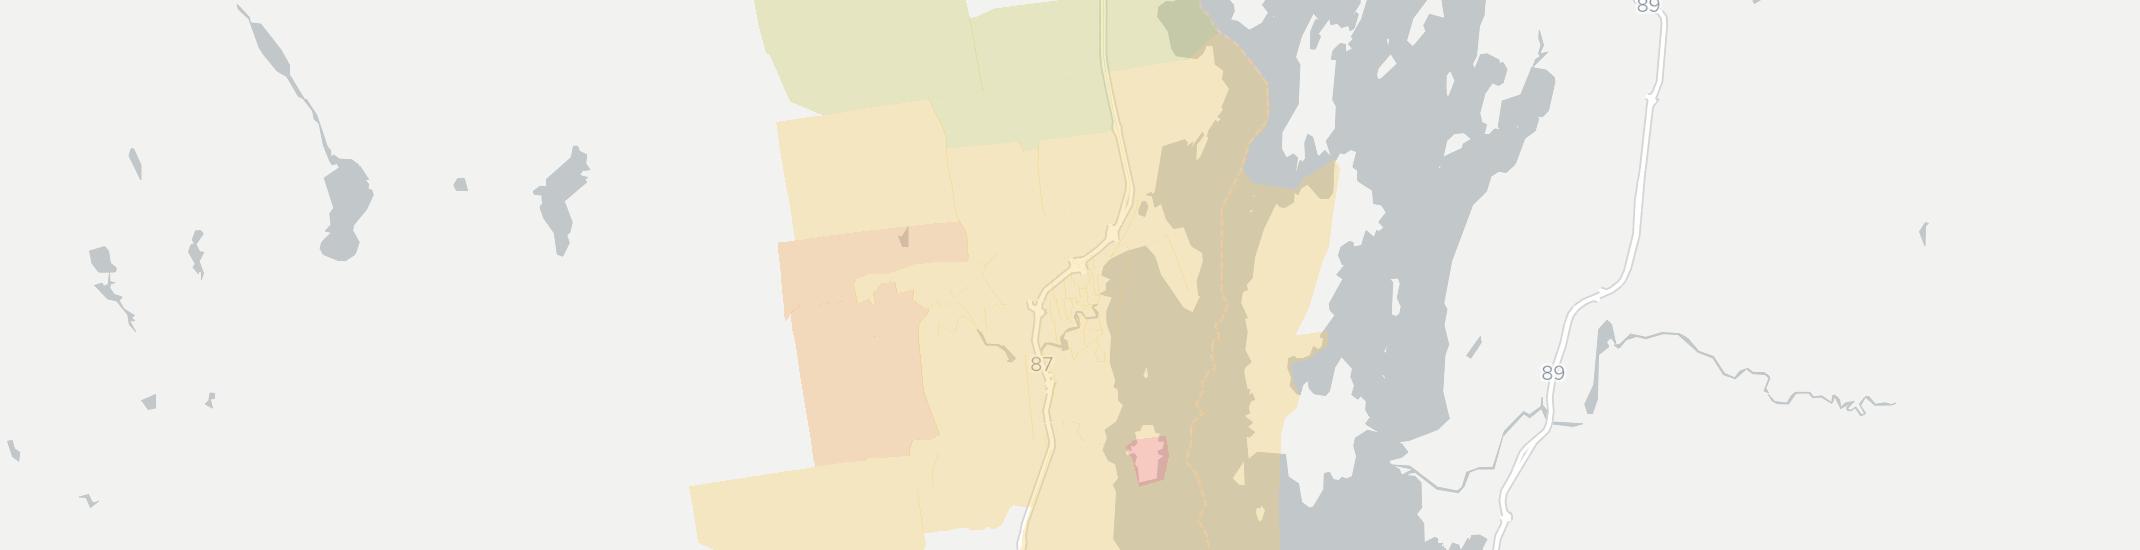 Plattsburgh Internet Competition Map. Click for interactive map